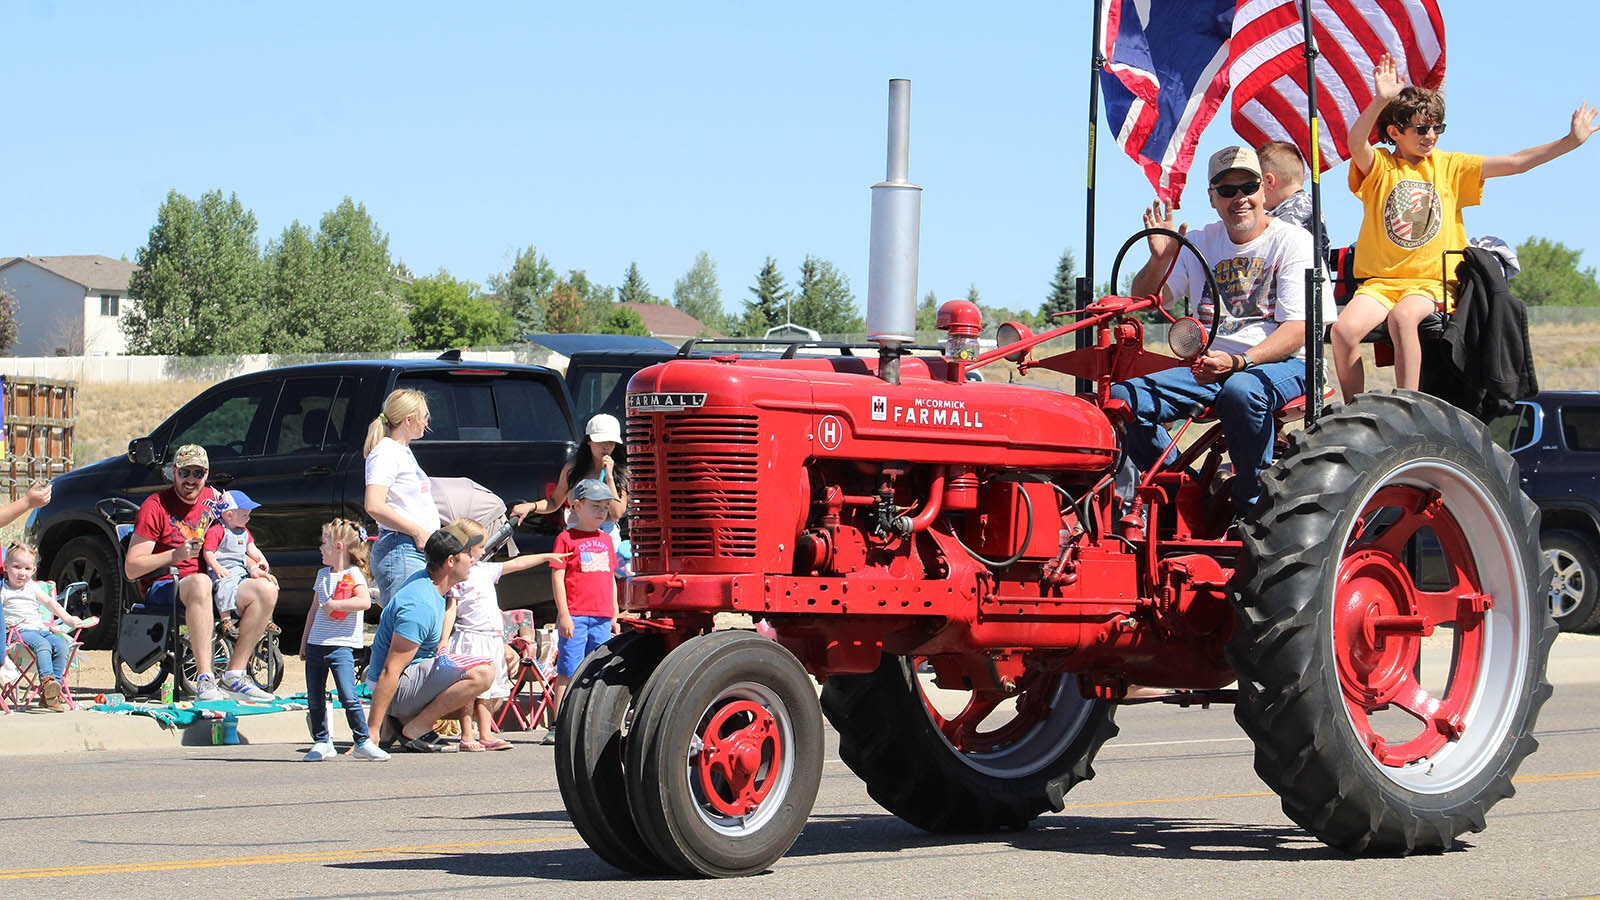 It's not a Wyoming parade without horses and vintage tractors.